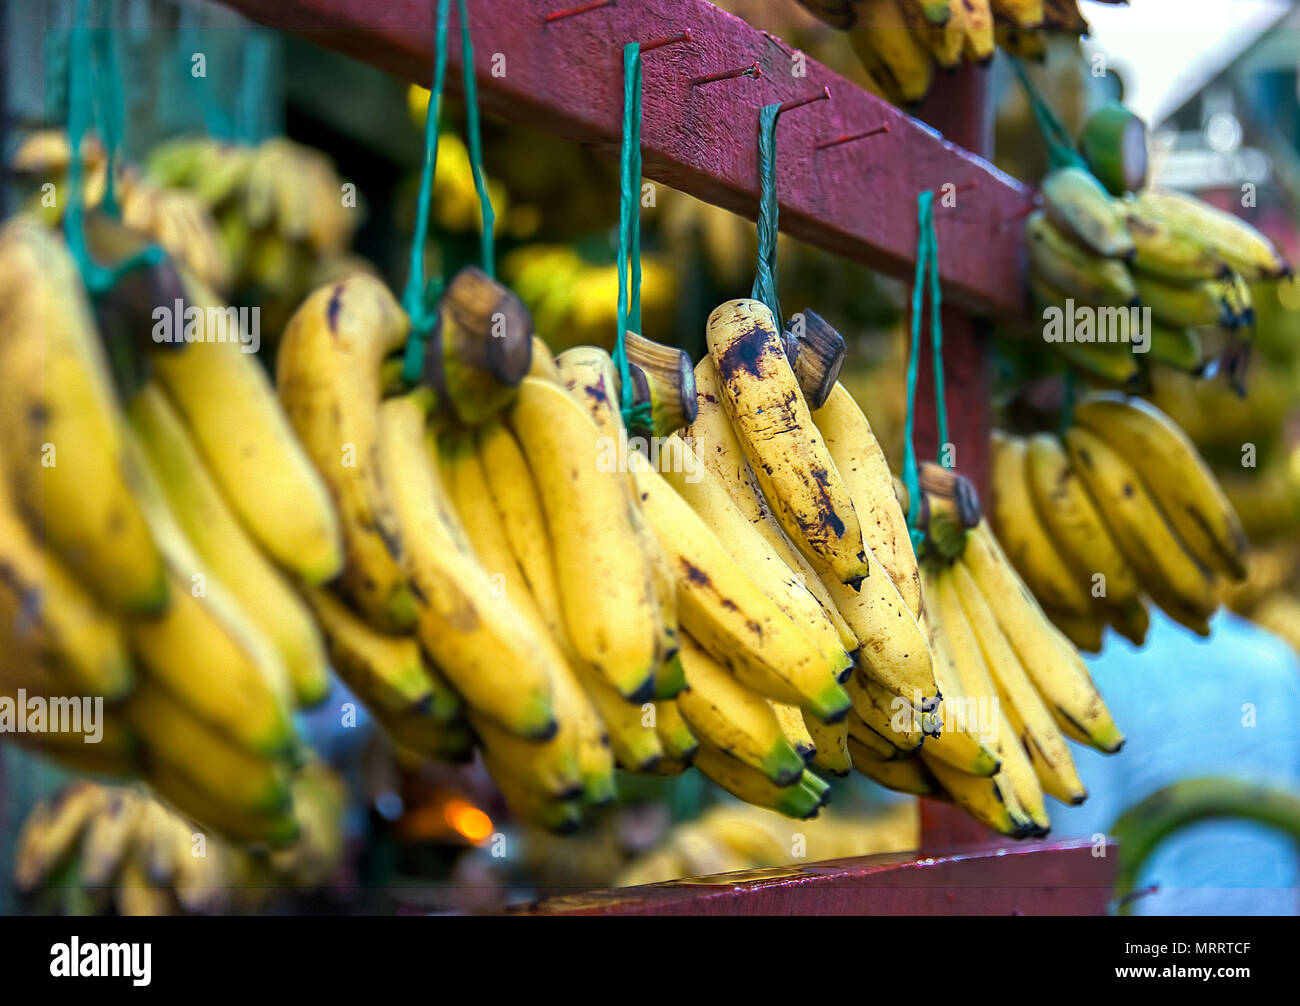 A store selling only bananas. Just Bananas. Each bunch is suspended on purple wooden bar. Some are still green, ripened yellow, and turning brown. Stock Photo